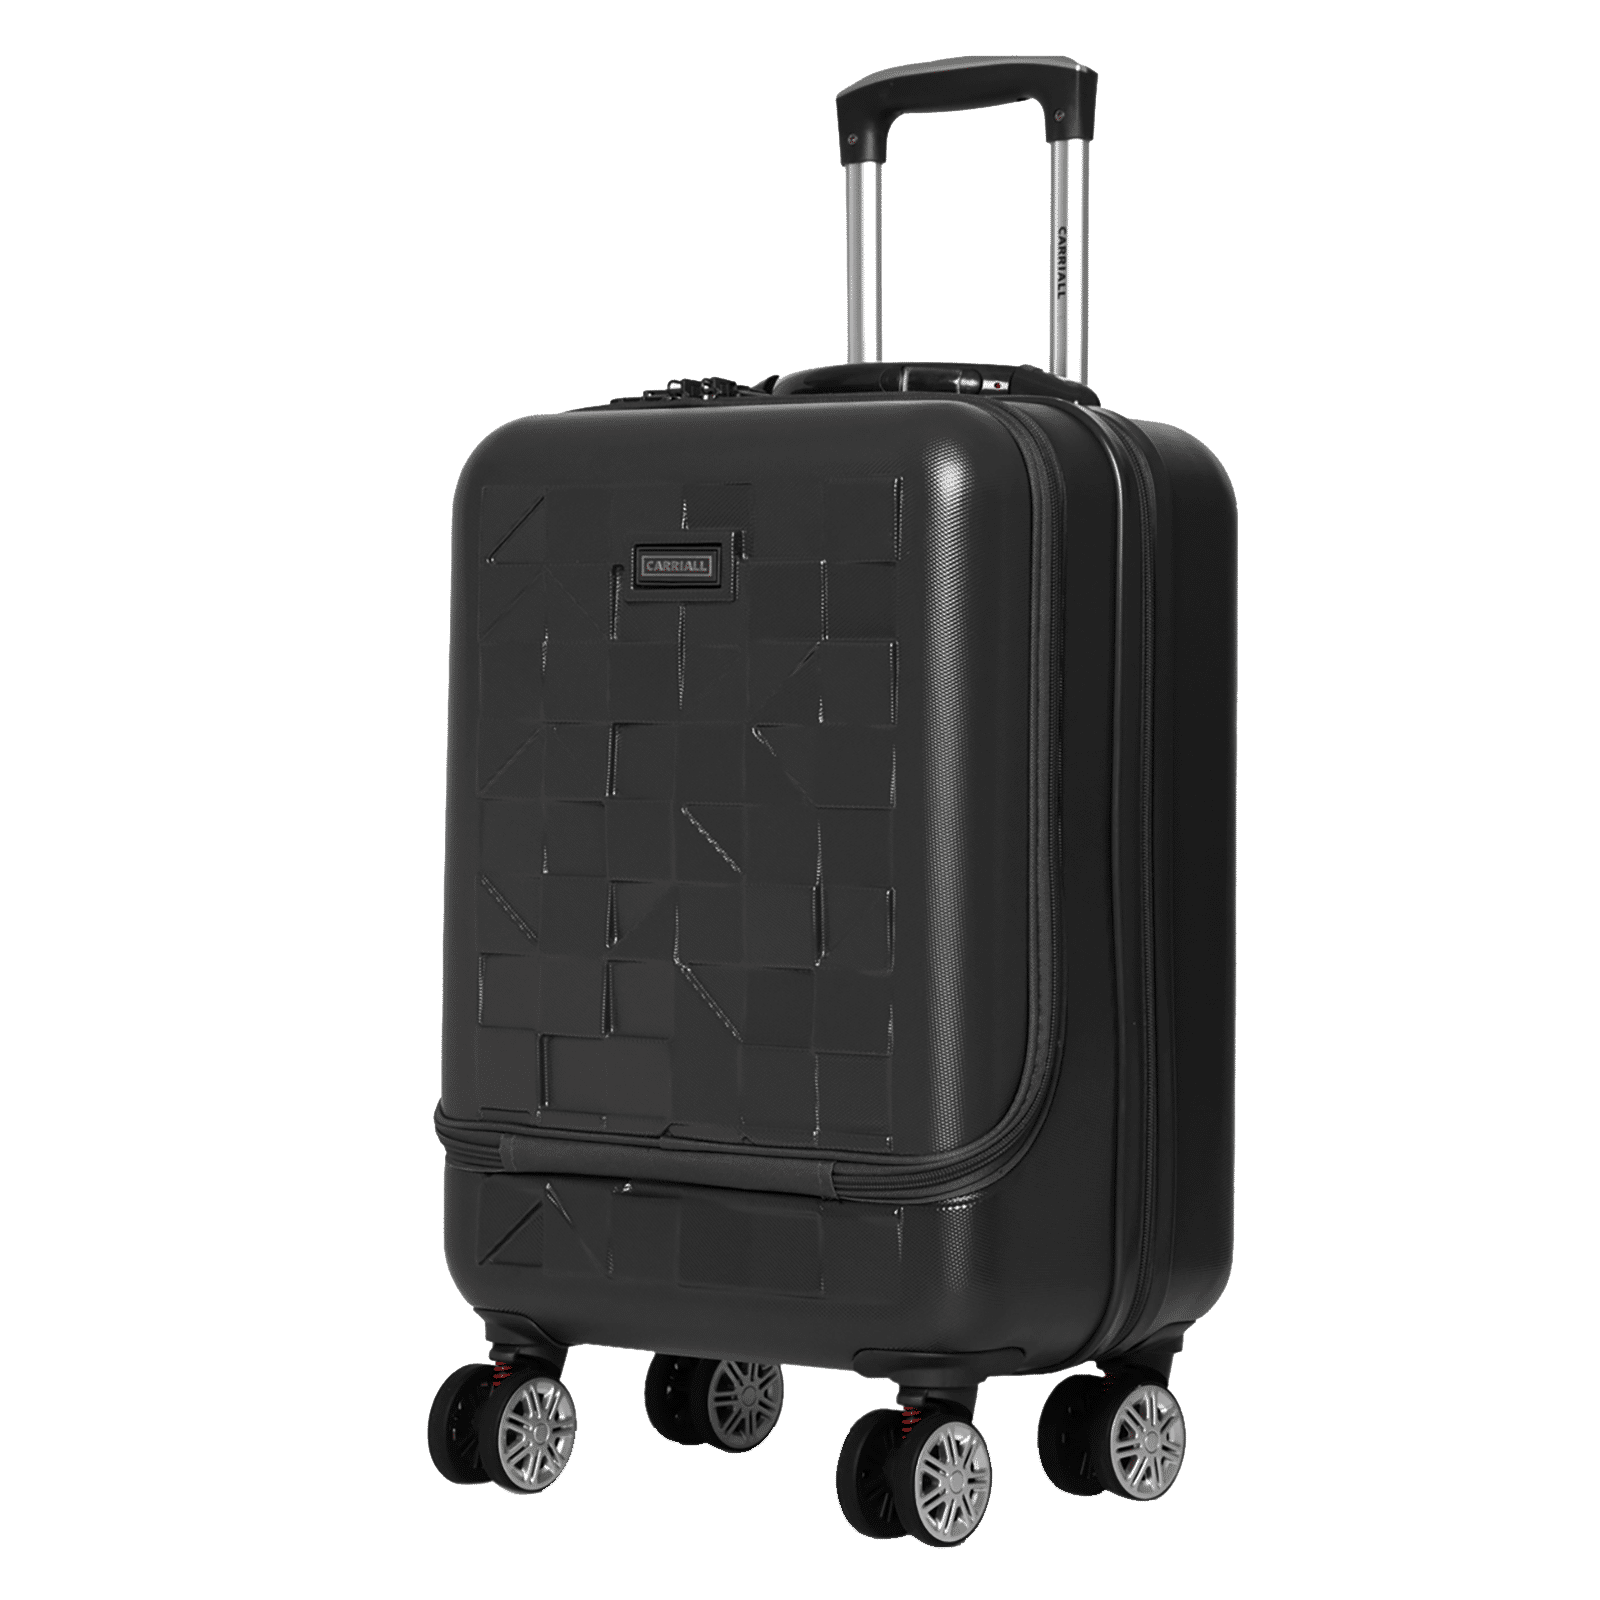 Luggage Sets: Buy Luggage Sets Online at Best Prices in India-Amazon.in